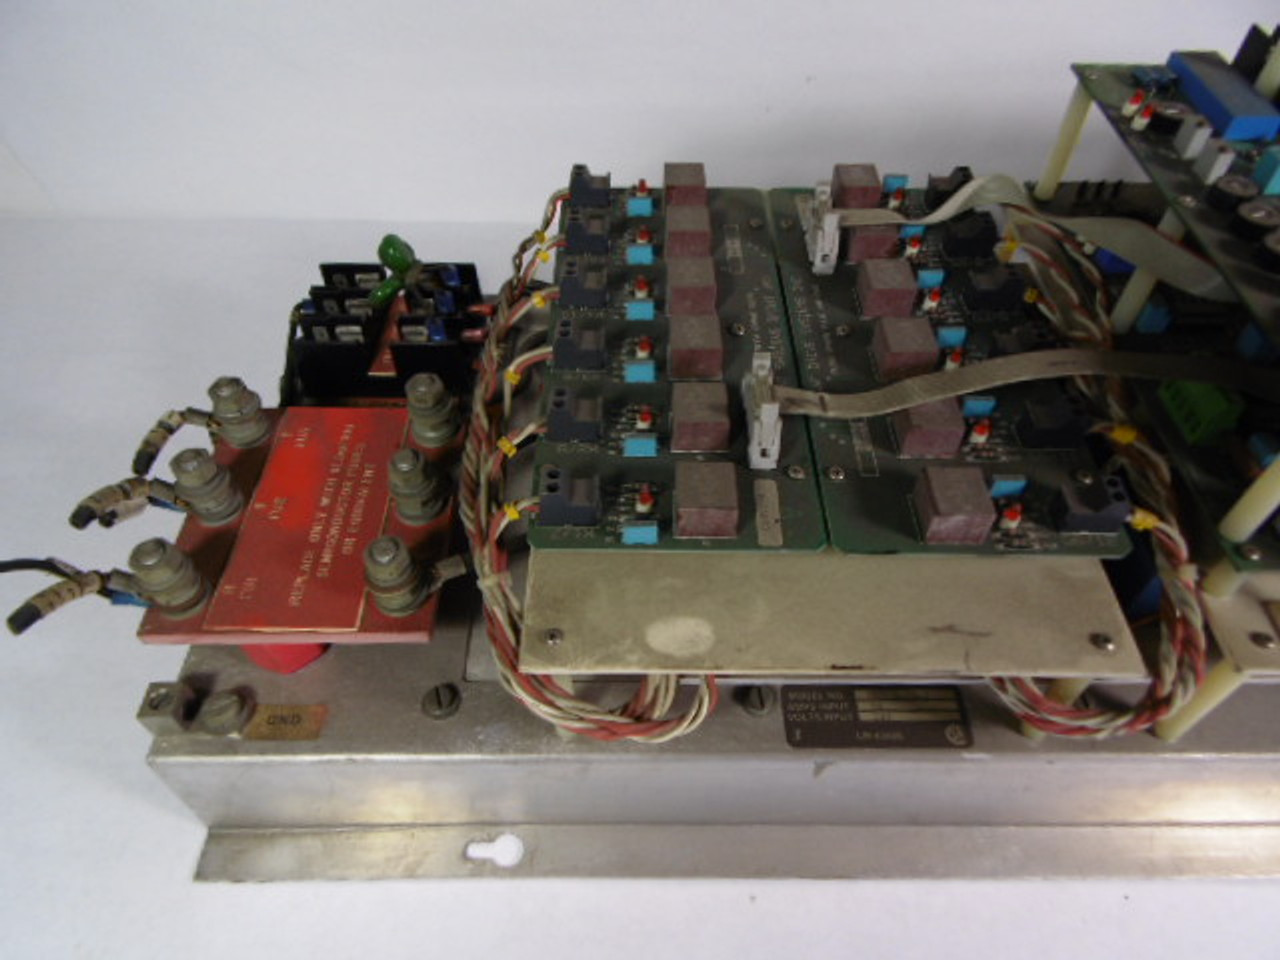 Saf Drive Systems DD312-70-2 DC Drive USED